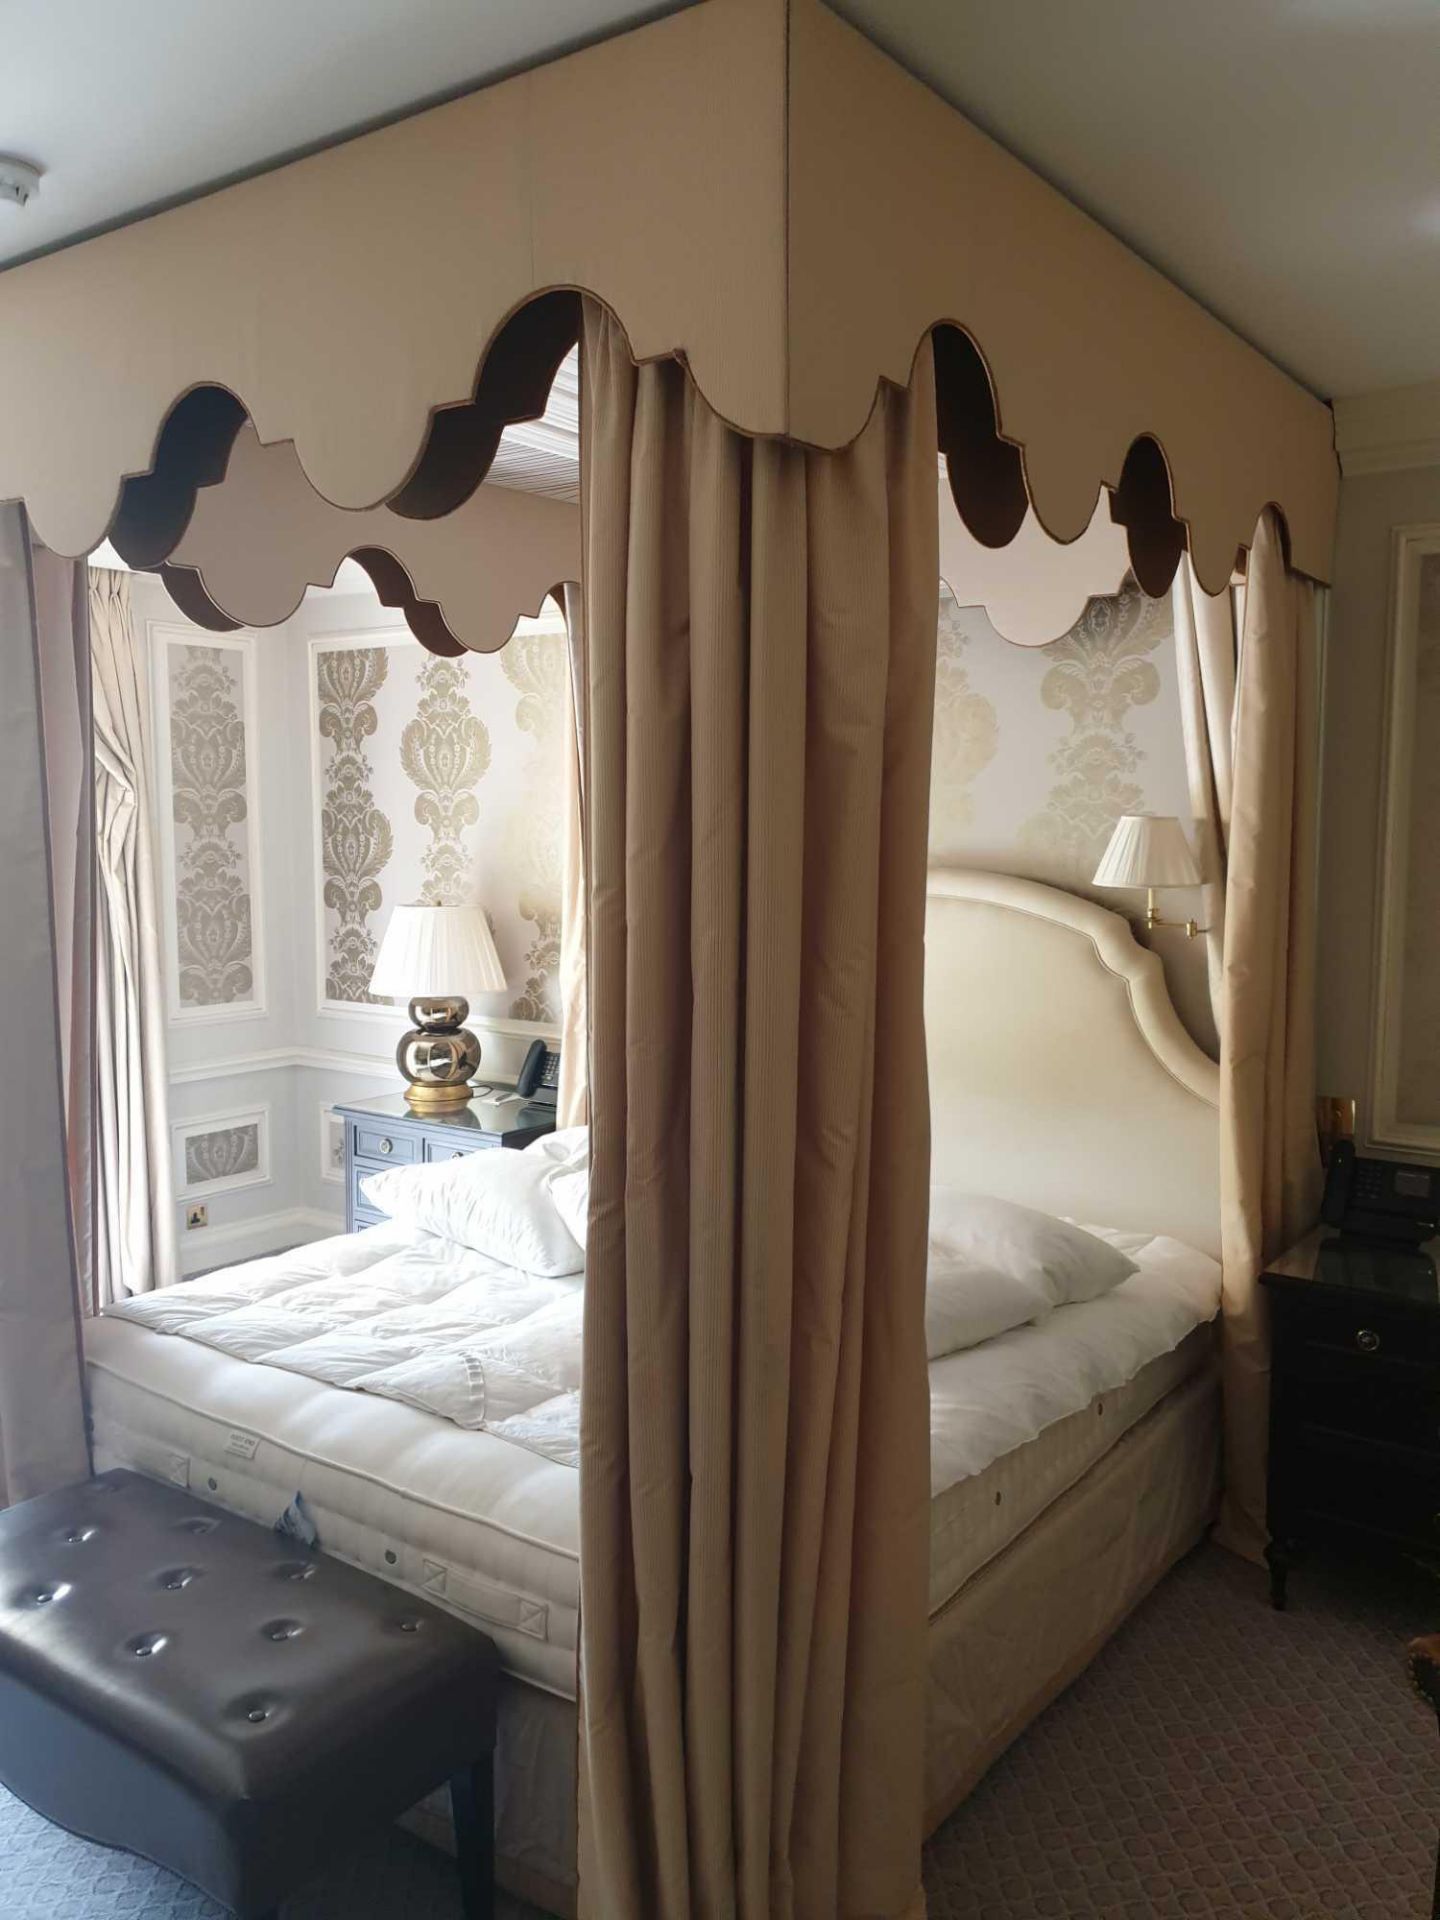 Bed Canopy Cream And Brown Floating Pelmet And Cream Headboard Silk Curtains Fully Lined Outer - Bild 5 aus 5